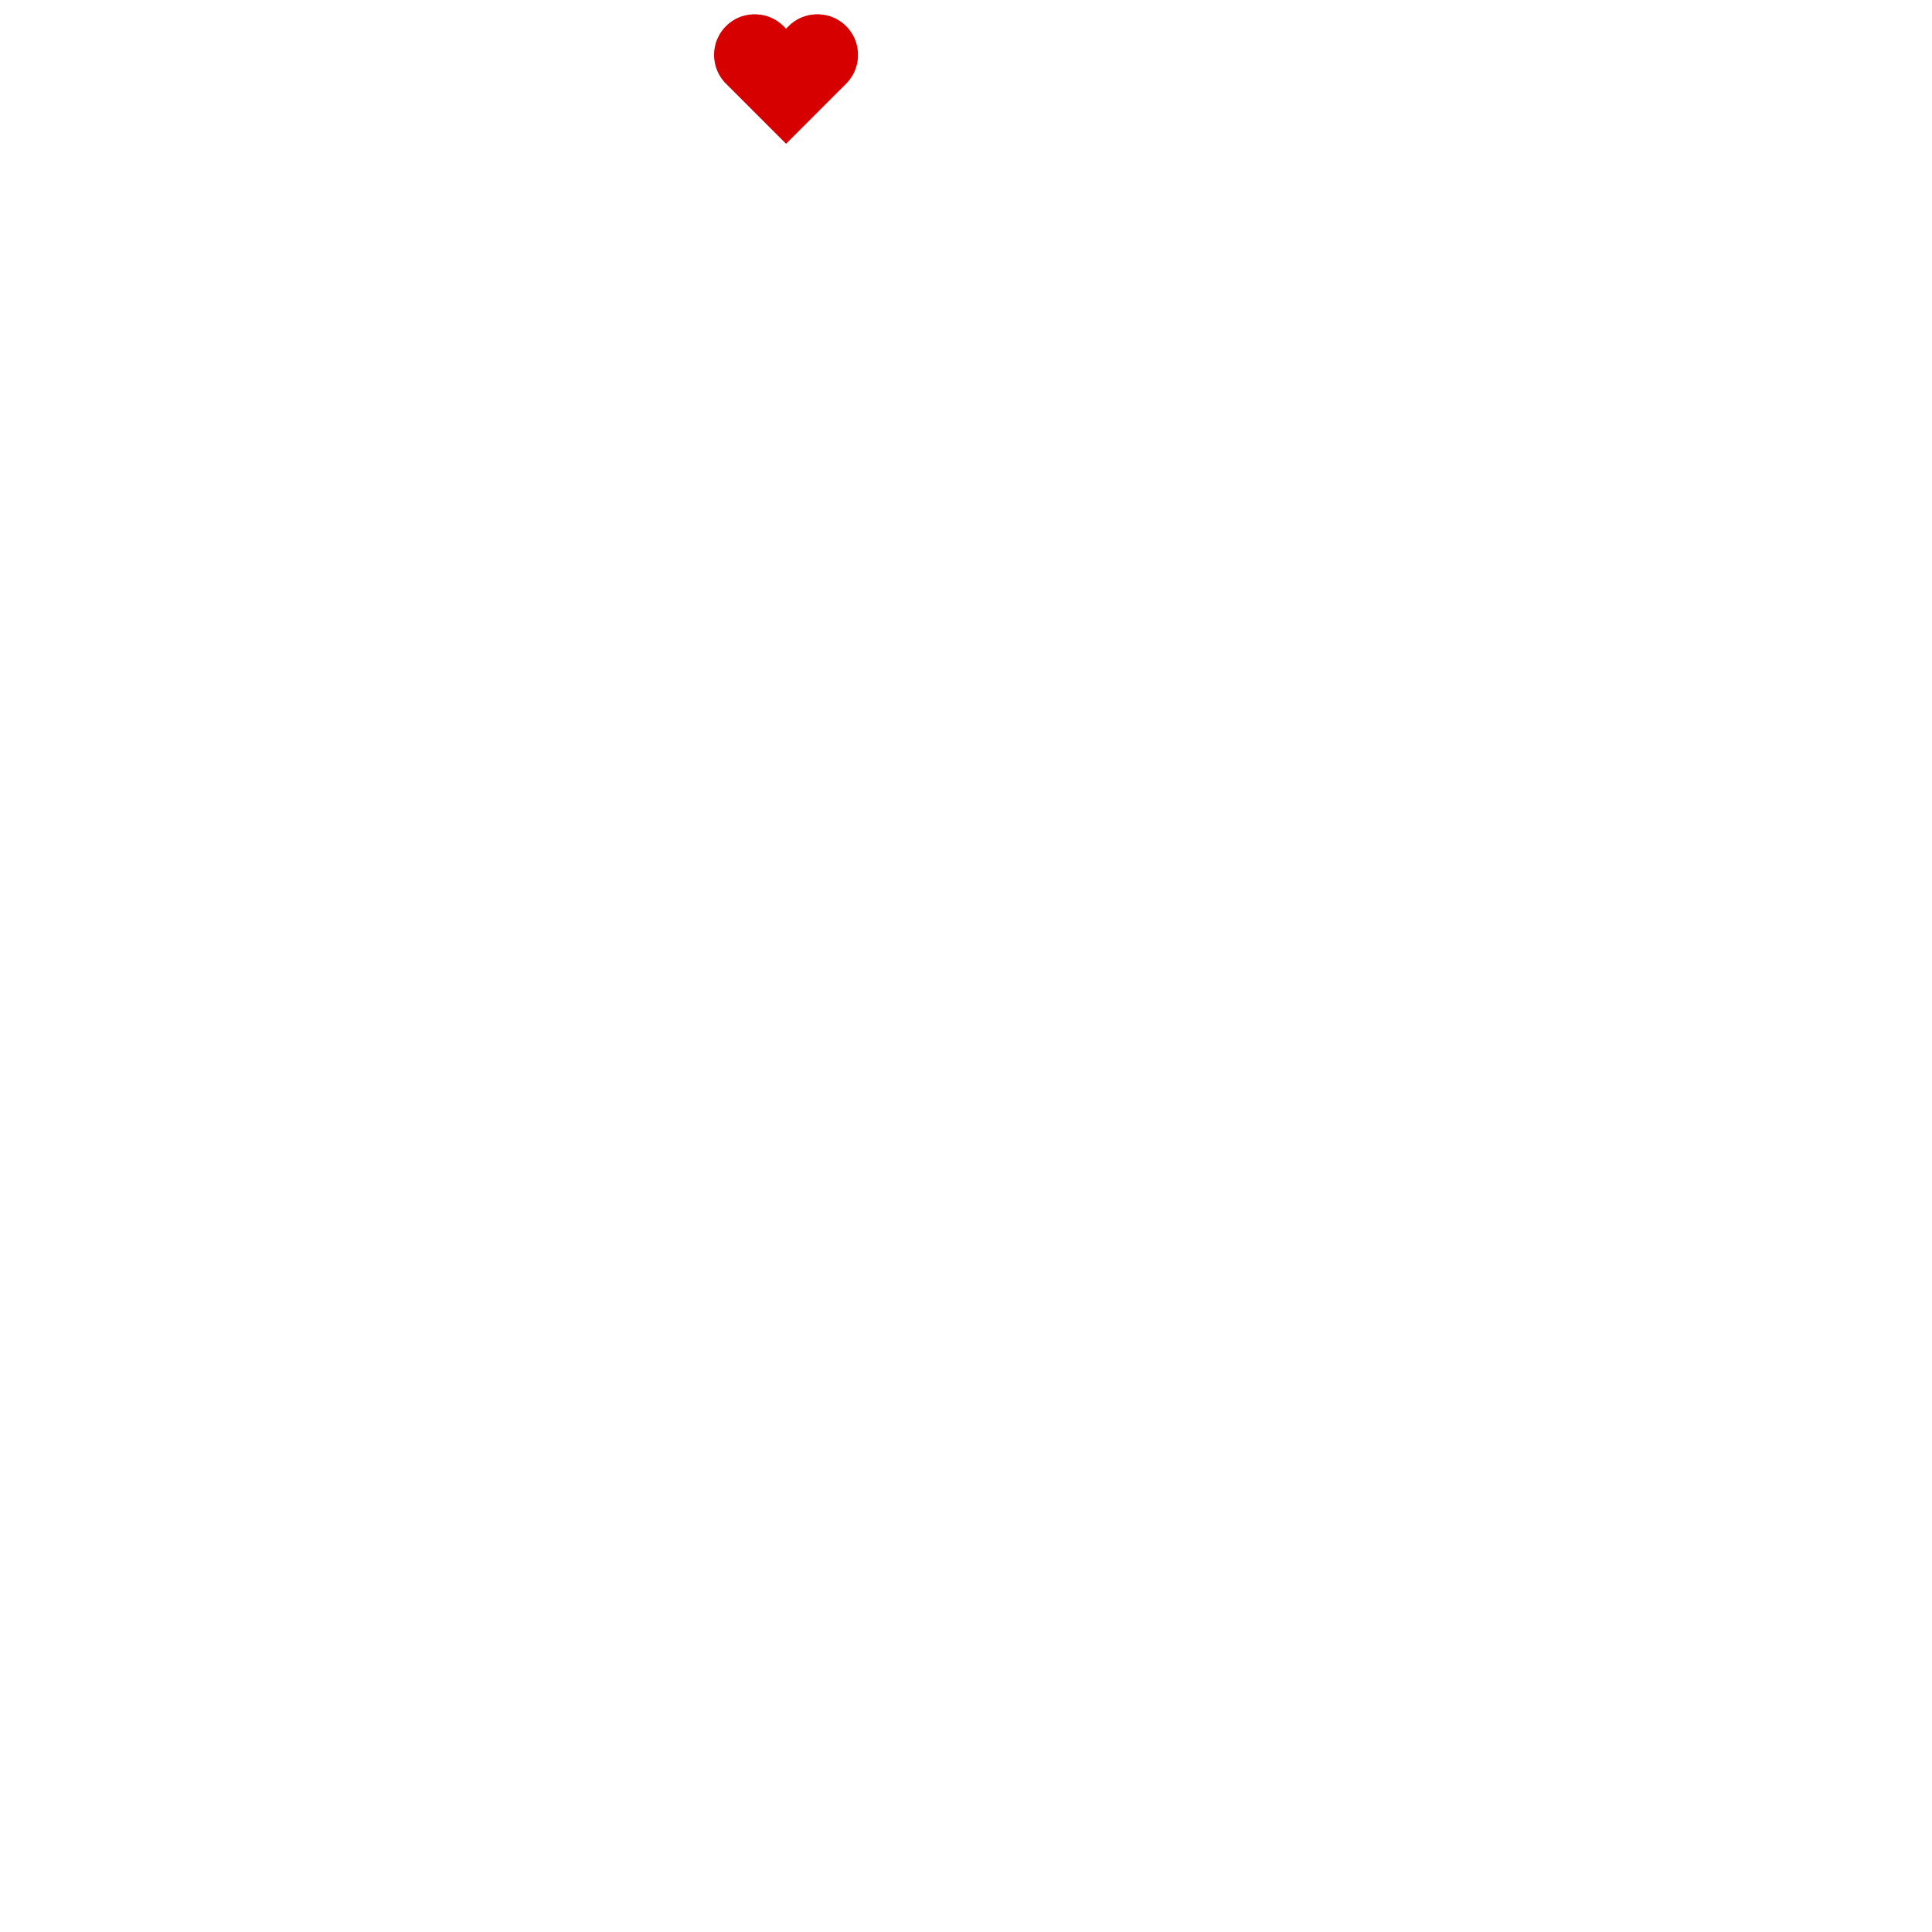 World Choir Games - The worlds biggest choir competition